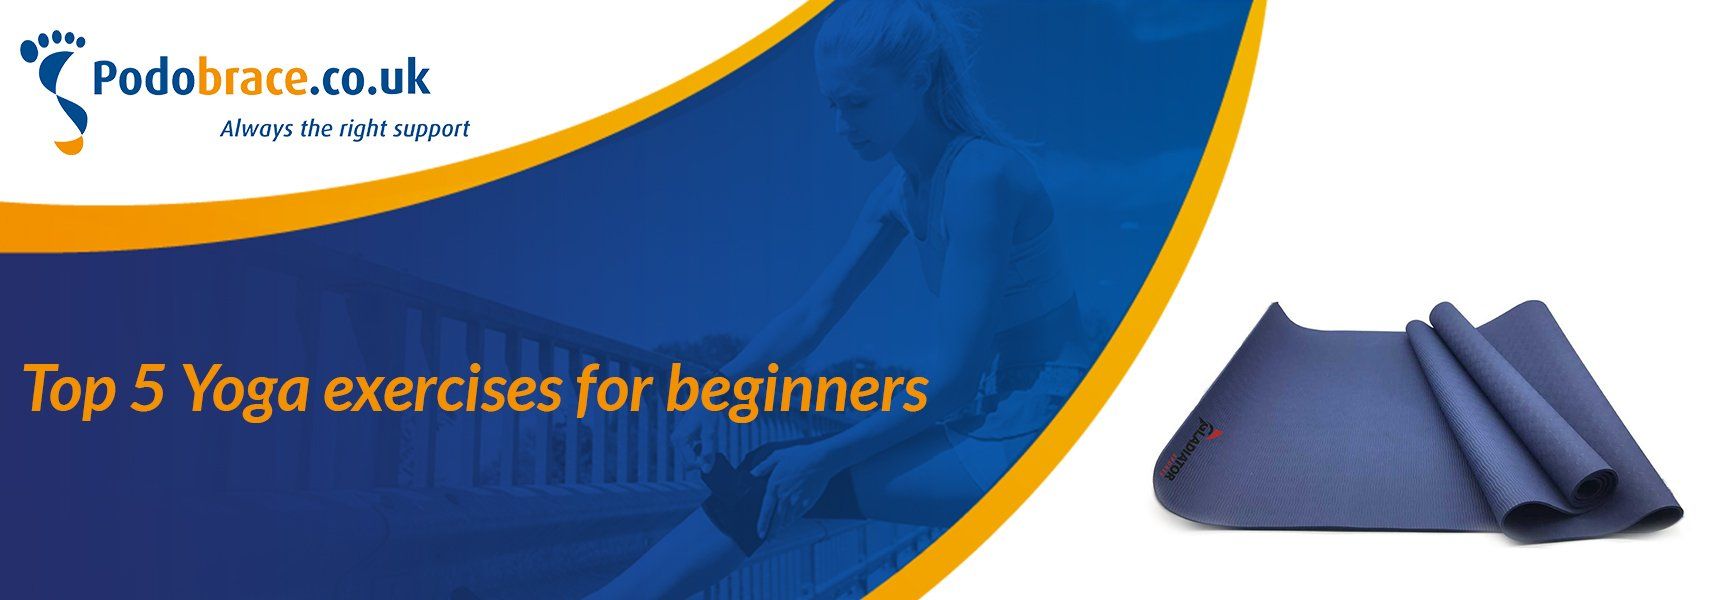 Top 5 yoga exercises for beginners